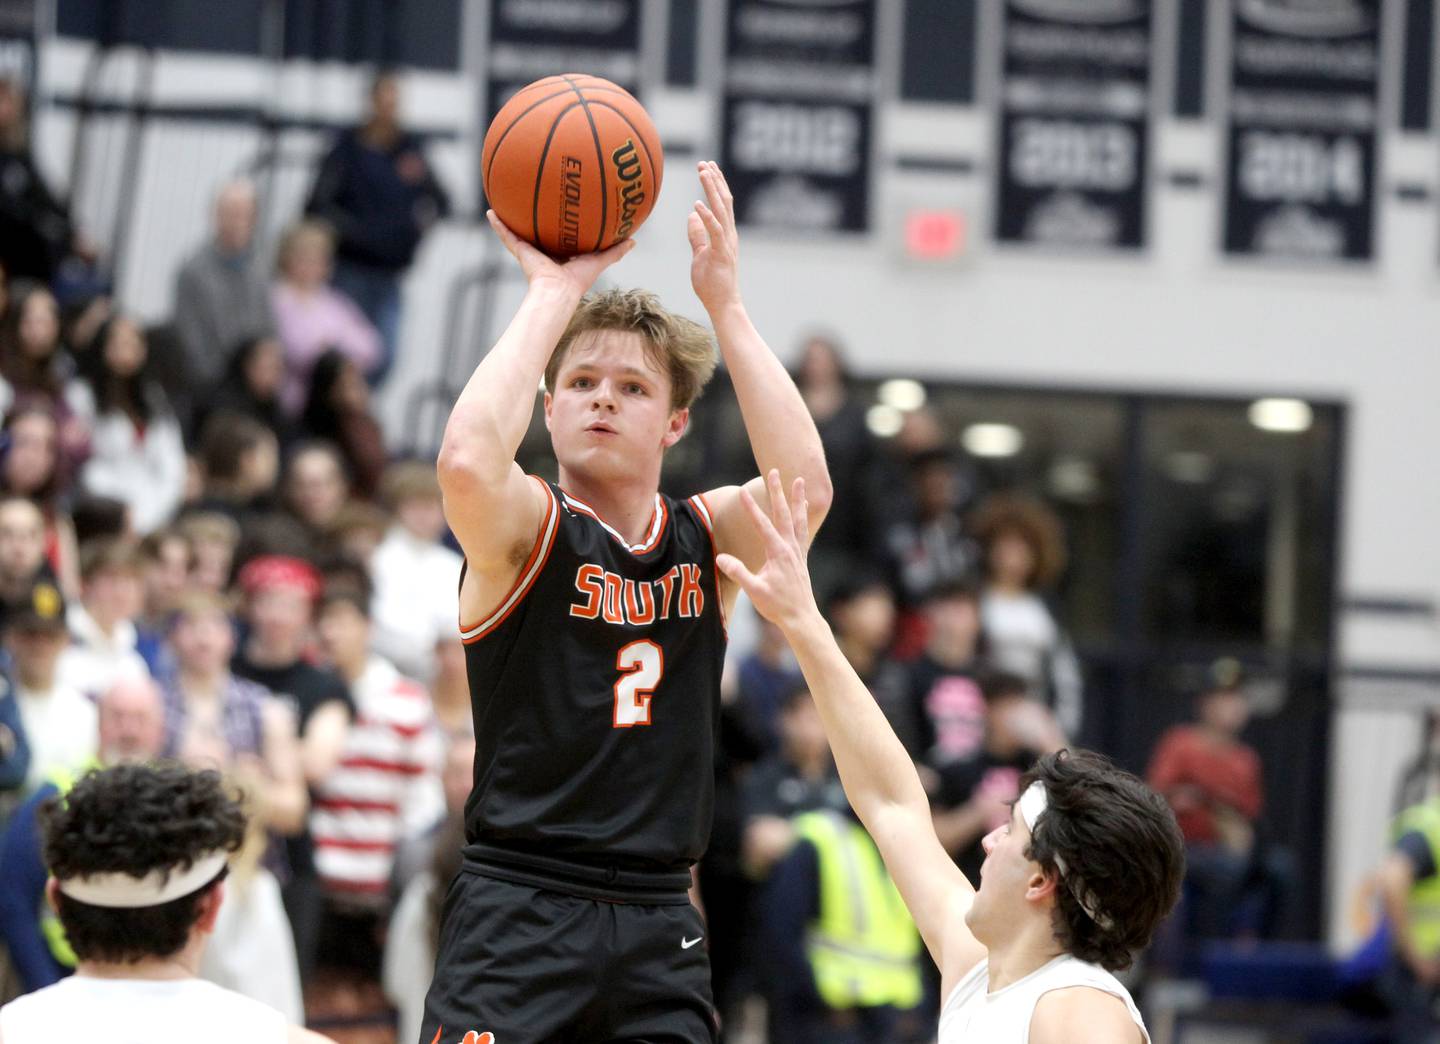 Wheaton Warrenville South’s Jake Vozza shoots the ball during a game at Lake Park in Roselle on Friday, Feb. 10, 2023.